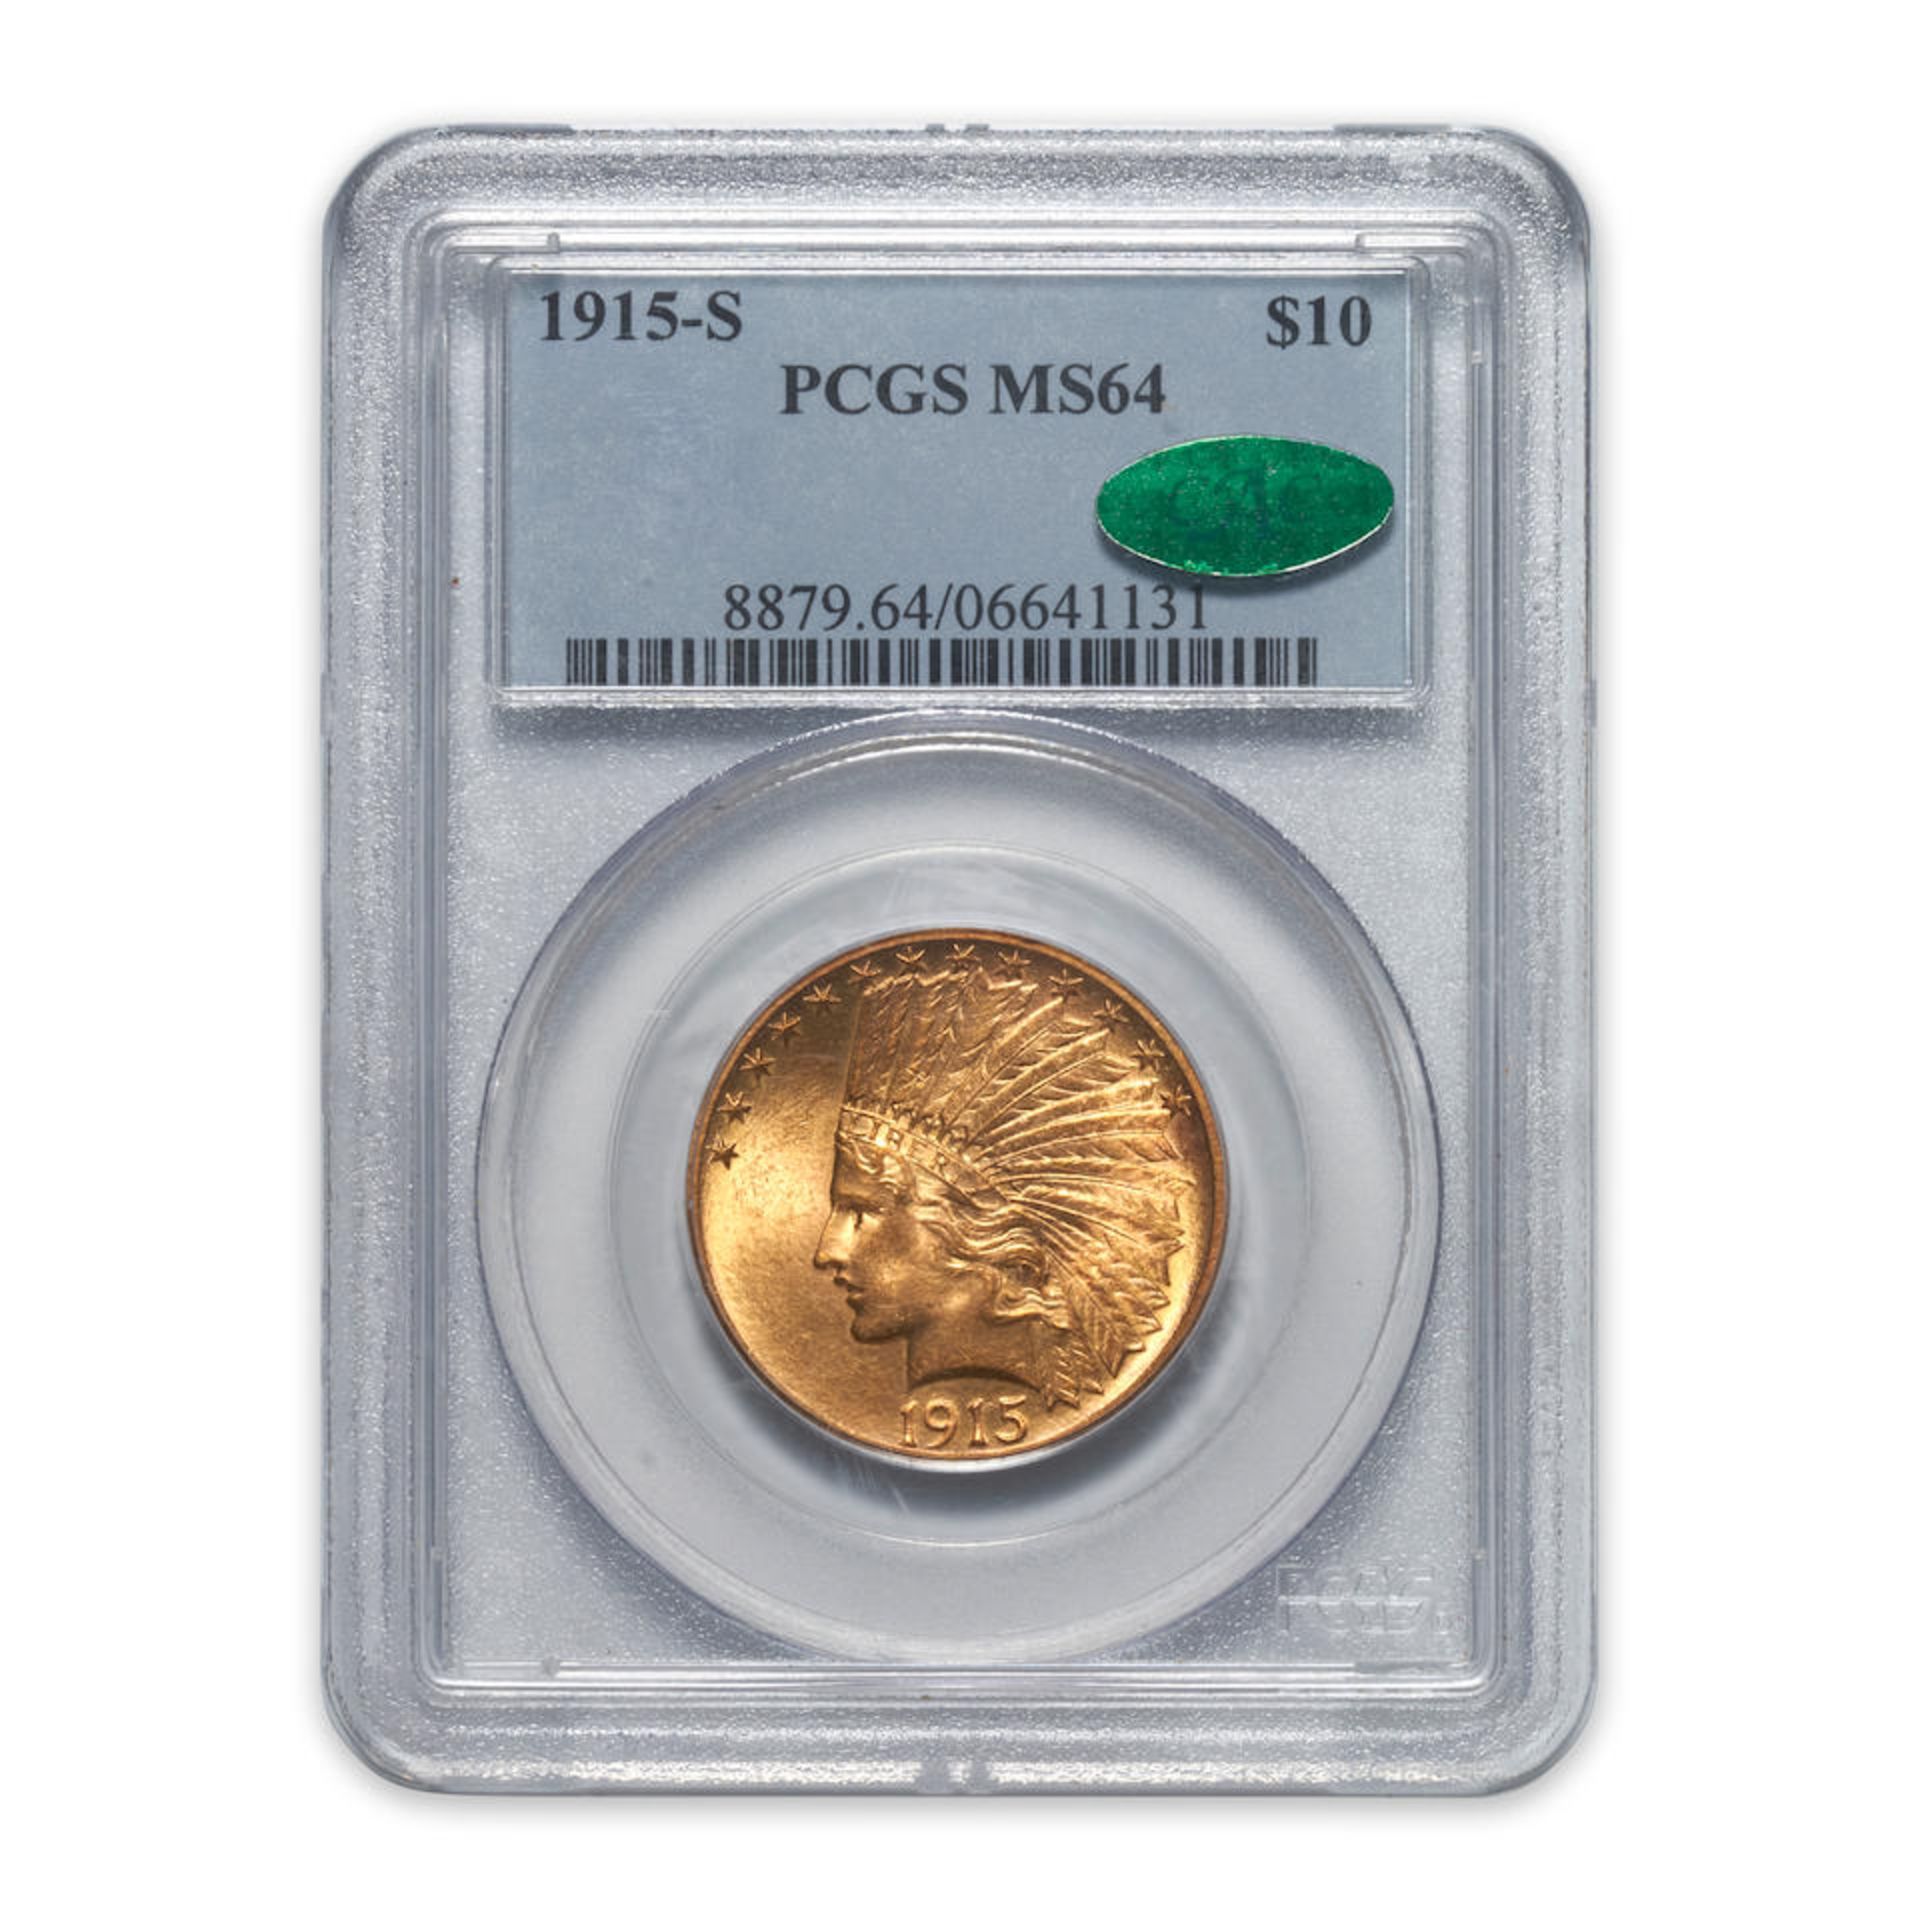 United States 1915-S Indian Head $10 Eagle Gold Coin.